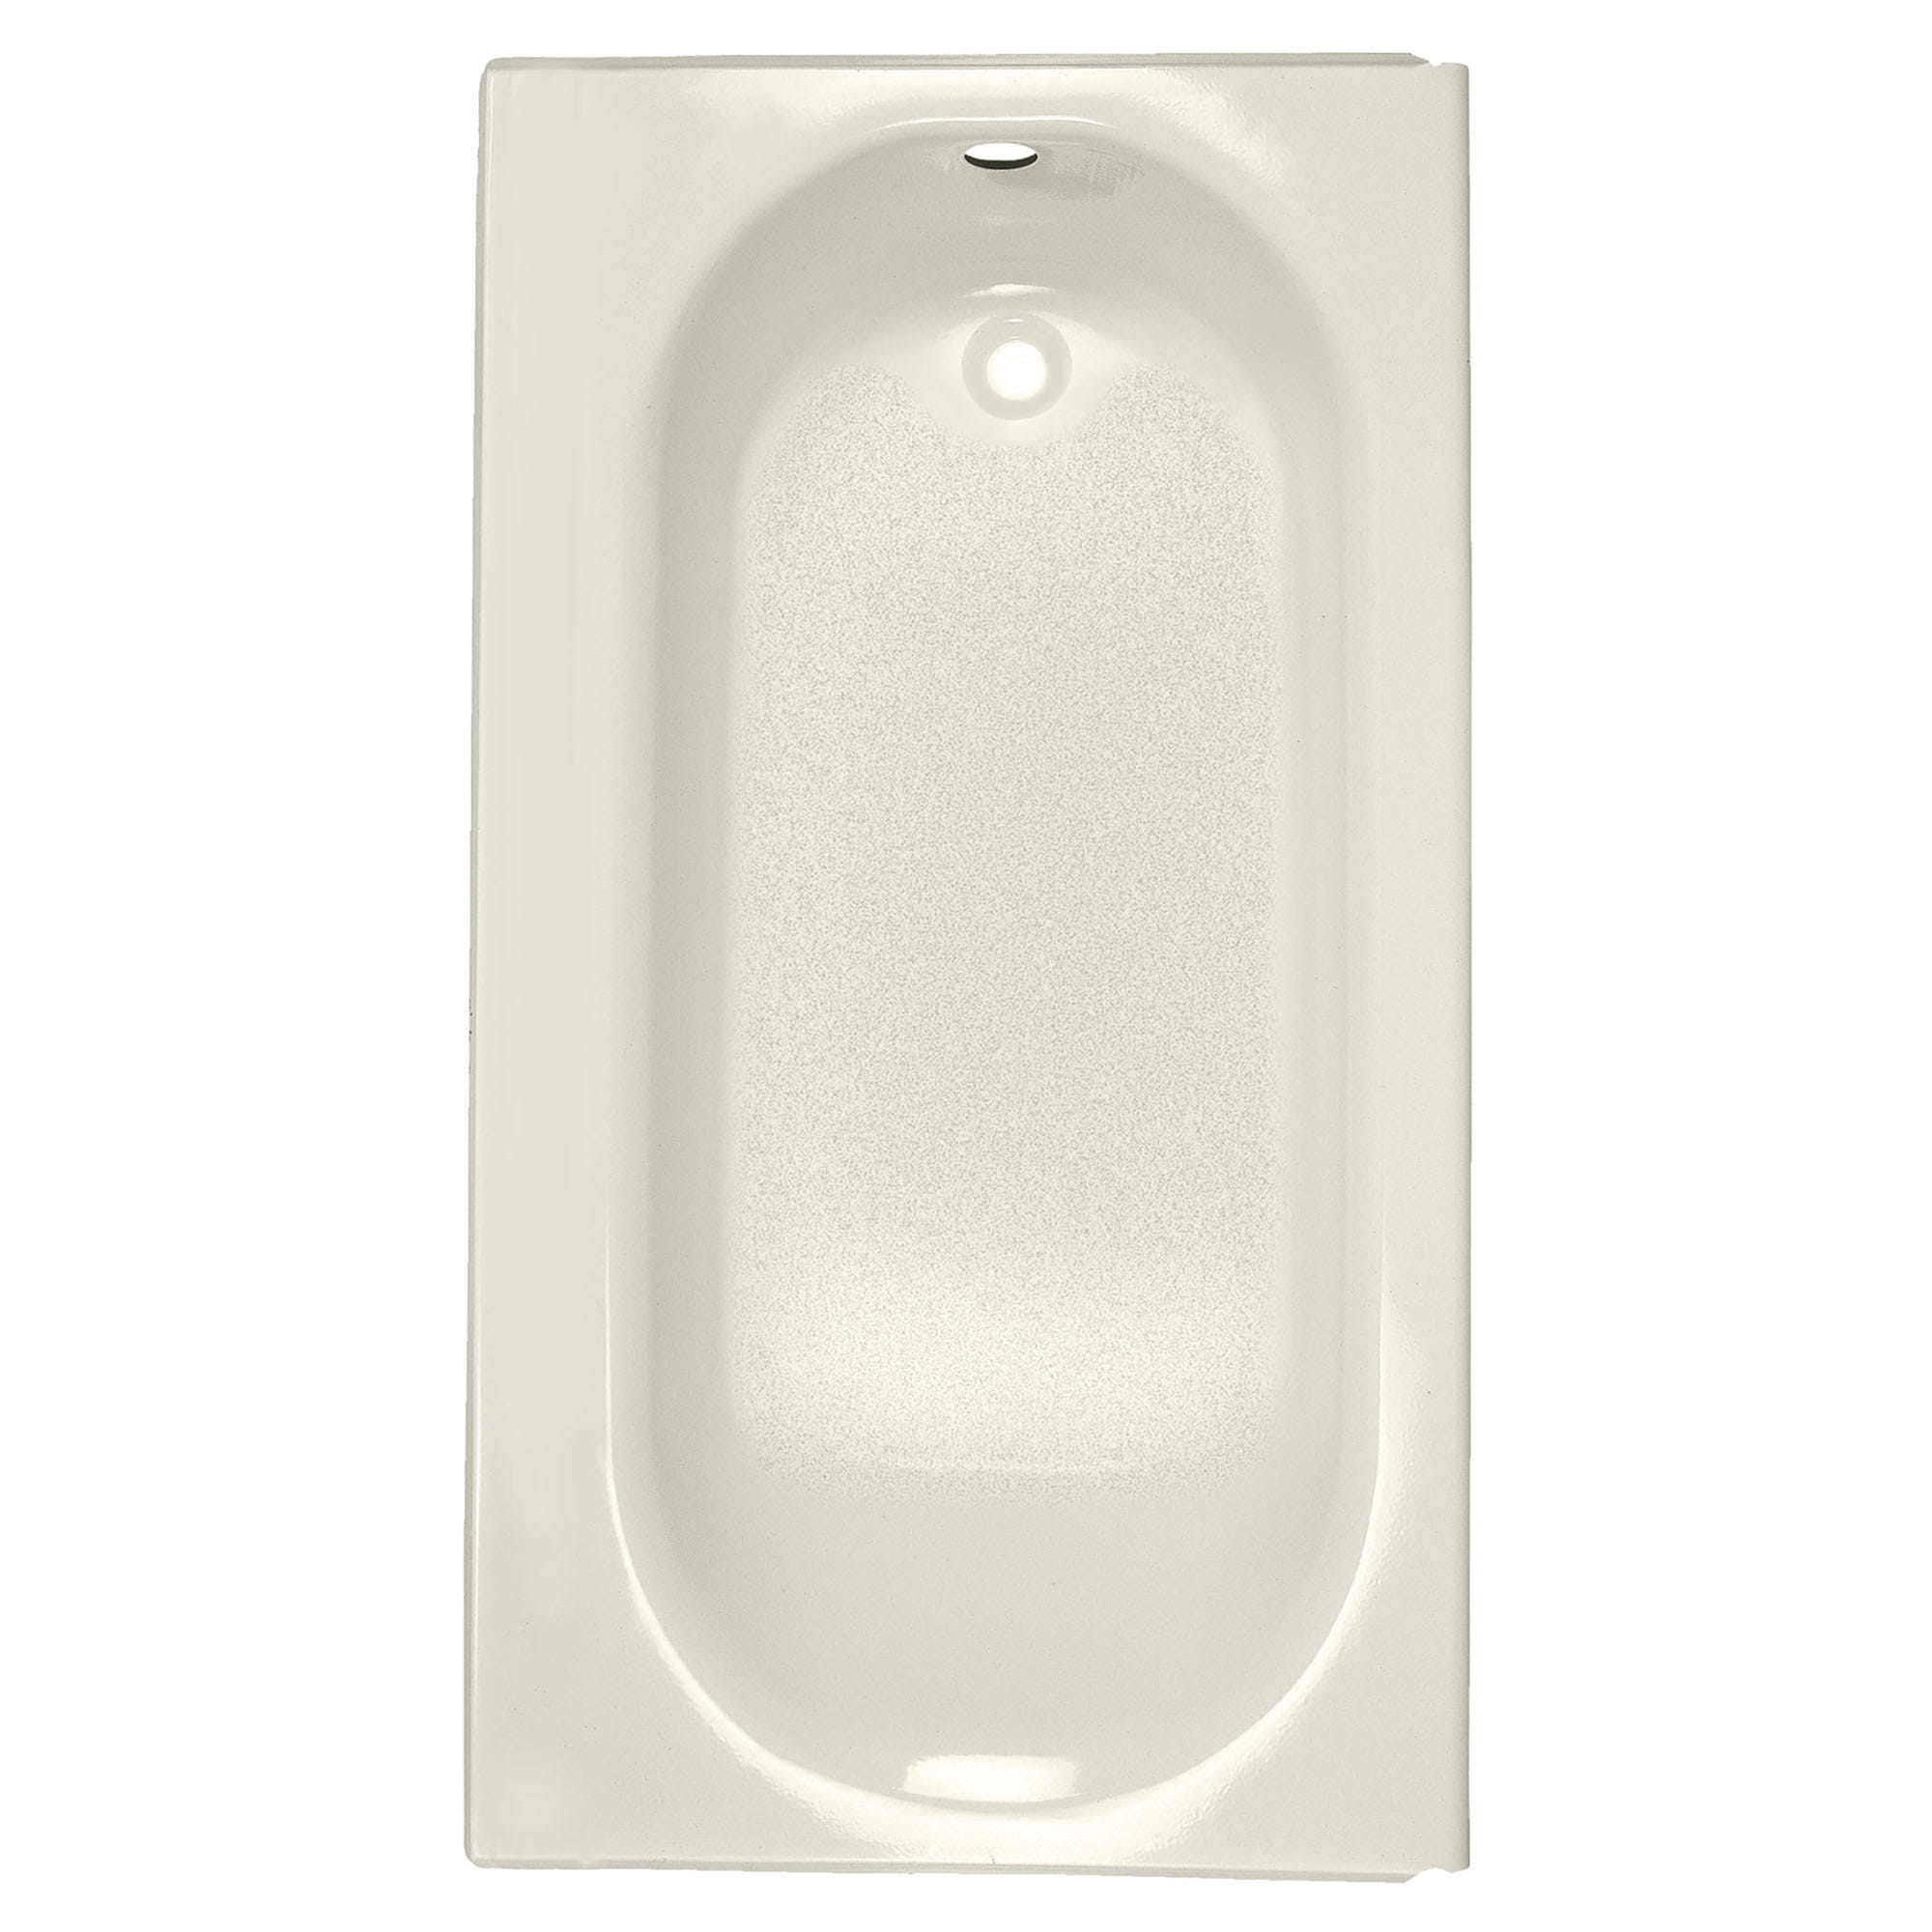 Princeton Americast 60 x 34 Inch Integral Apron Bathtub Right Hand Outlet with Luxury Ledge LINEN